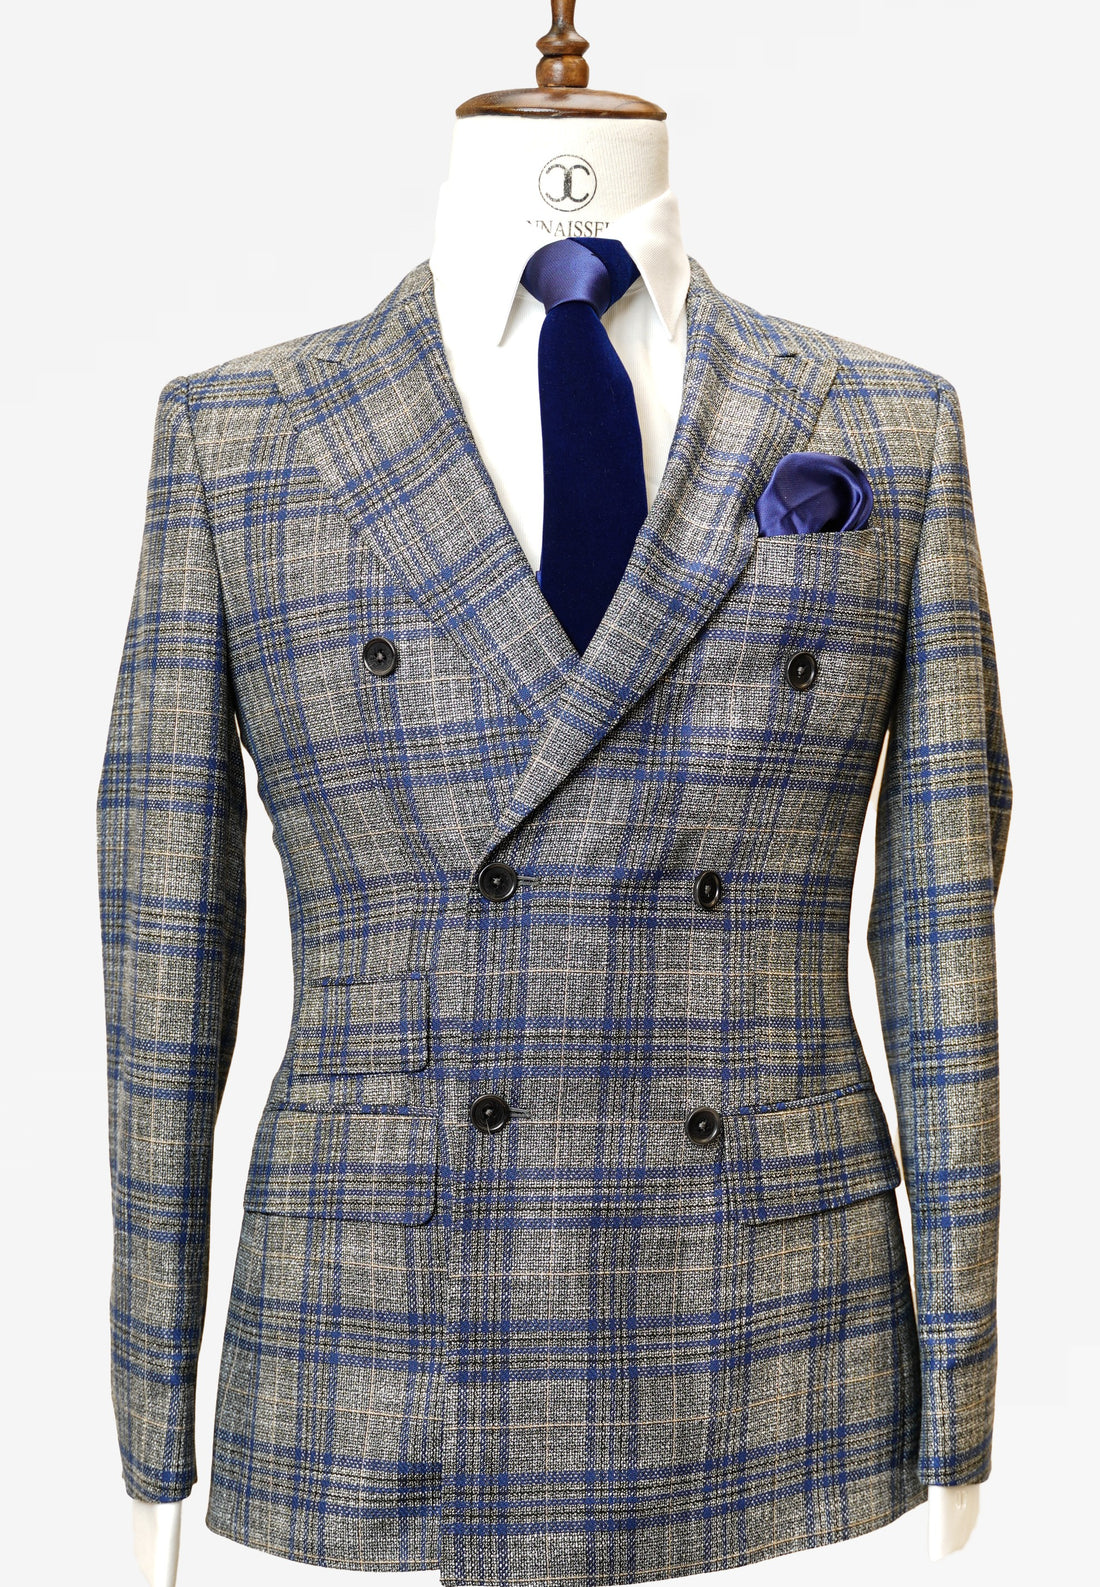 Dormeuil - Grey with blue tweed check pattern double breasted slim fit suit